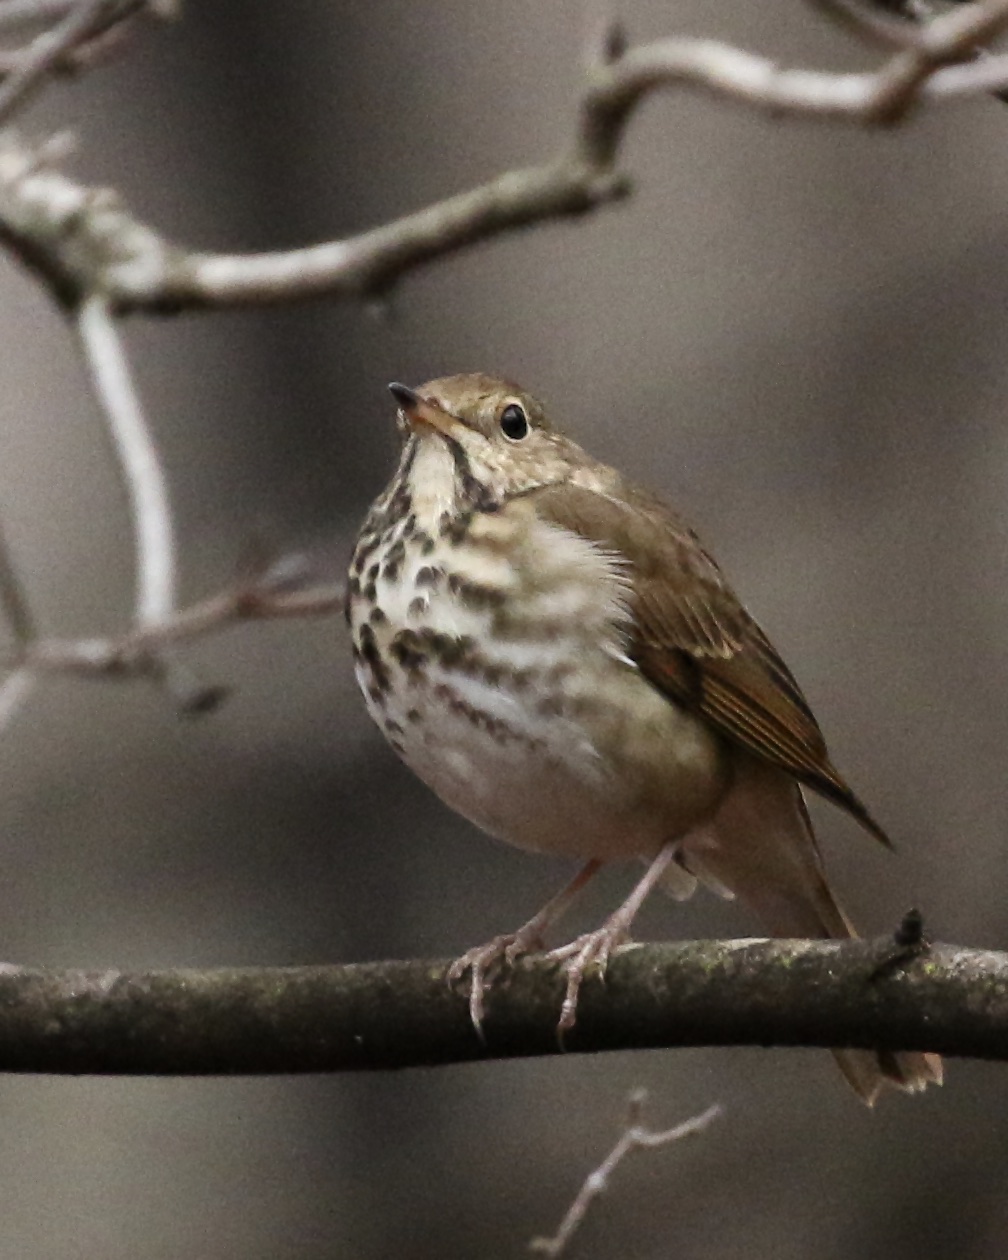 ~It was a less than ideal morning for photos, this shot was taken at ISO 3200.   Hermit Thrush at Goose Pond Mountain, 12/24/15.~